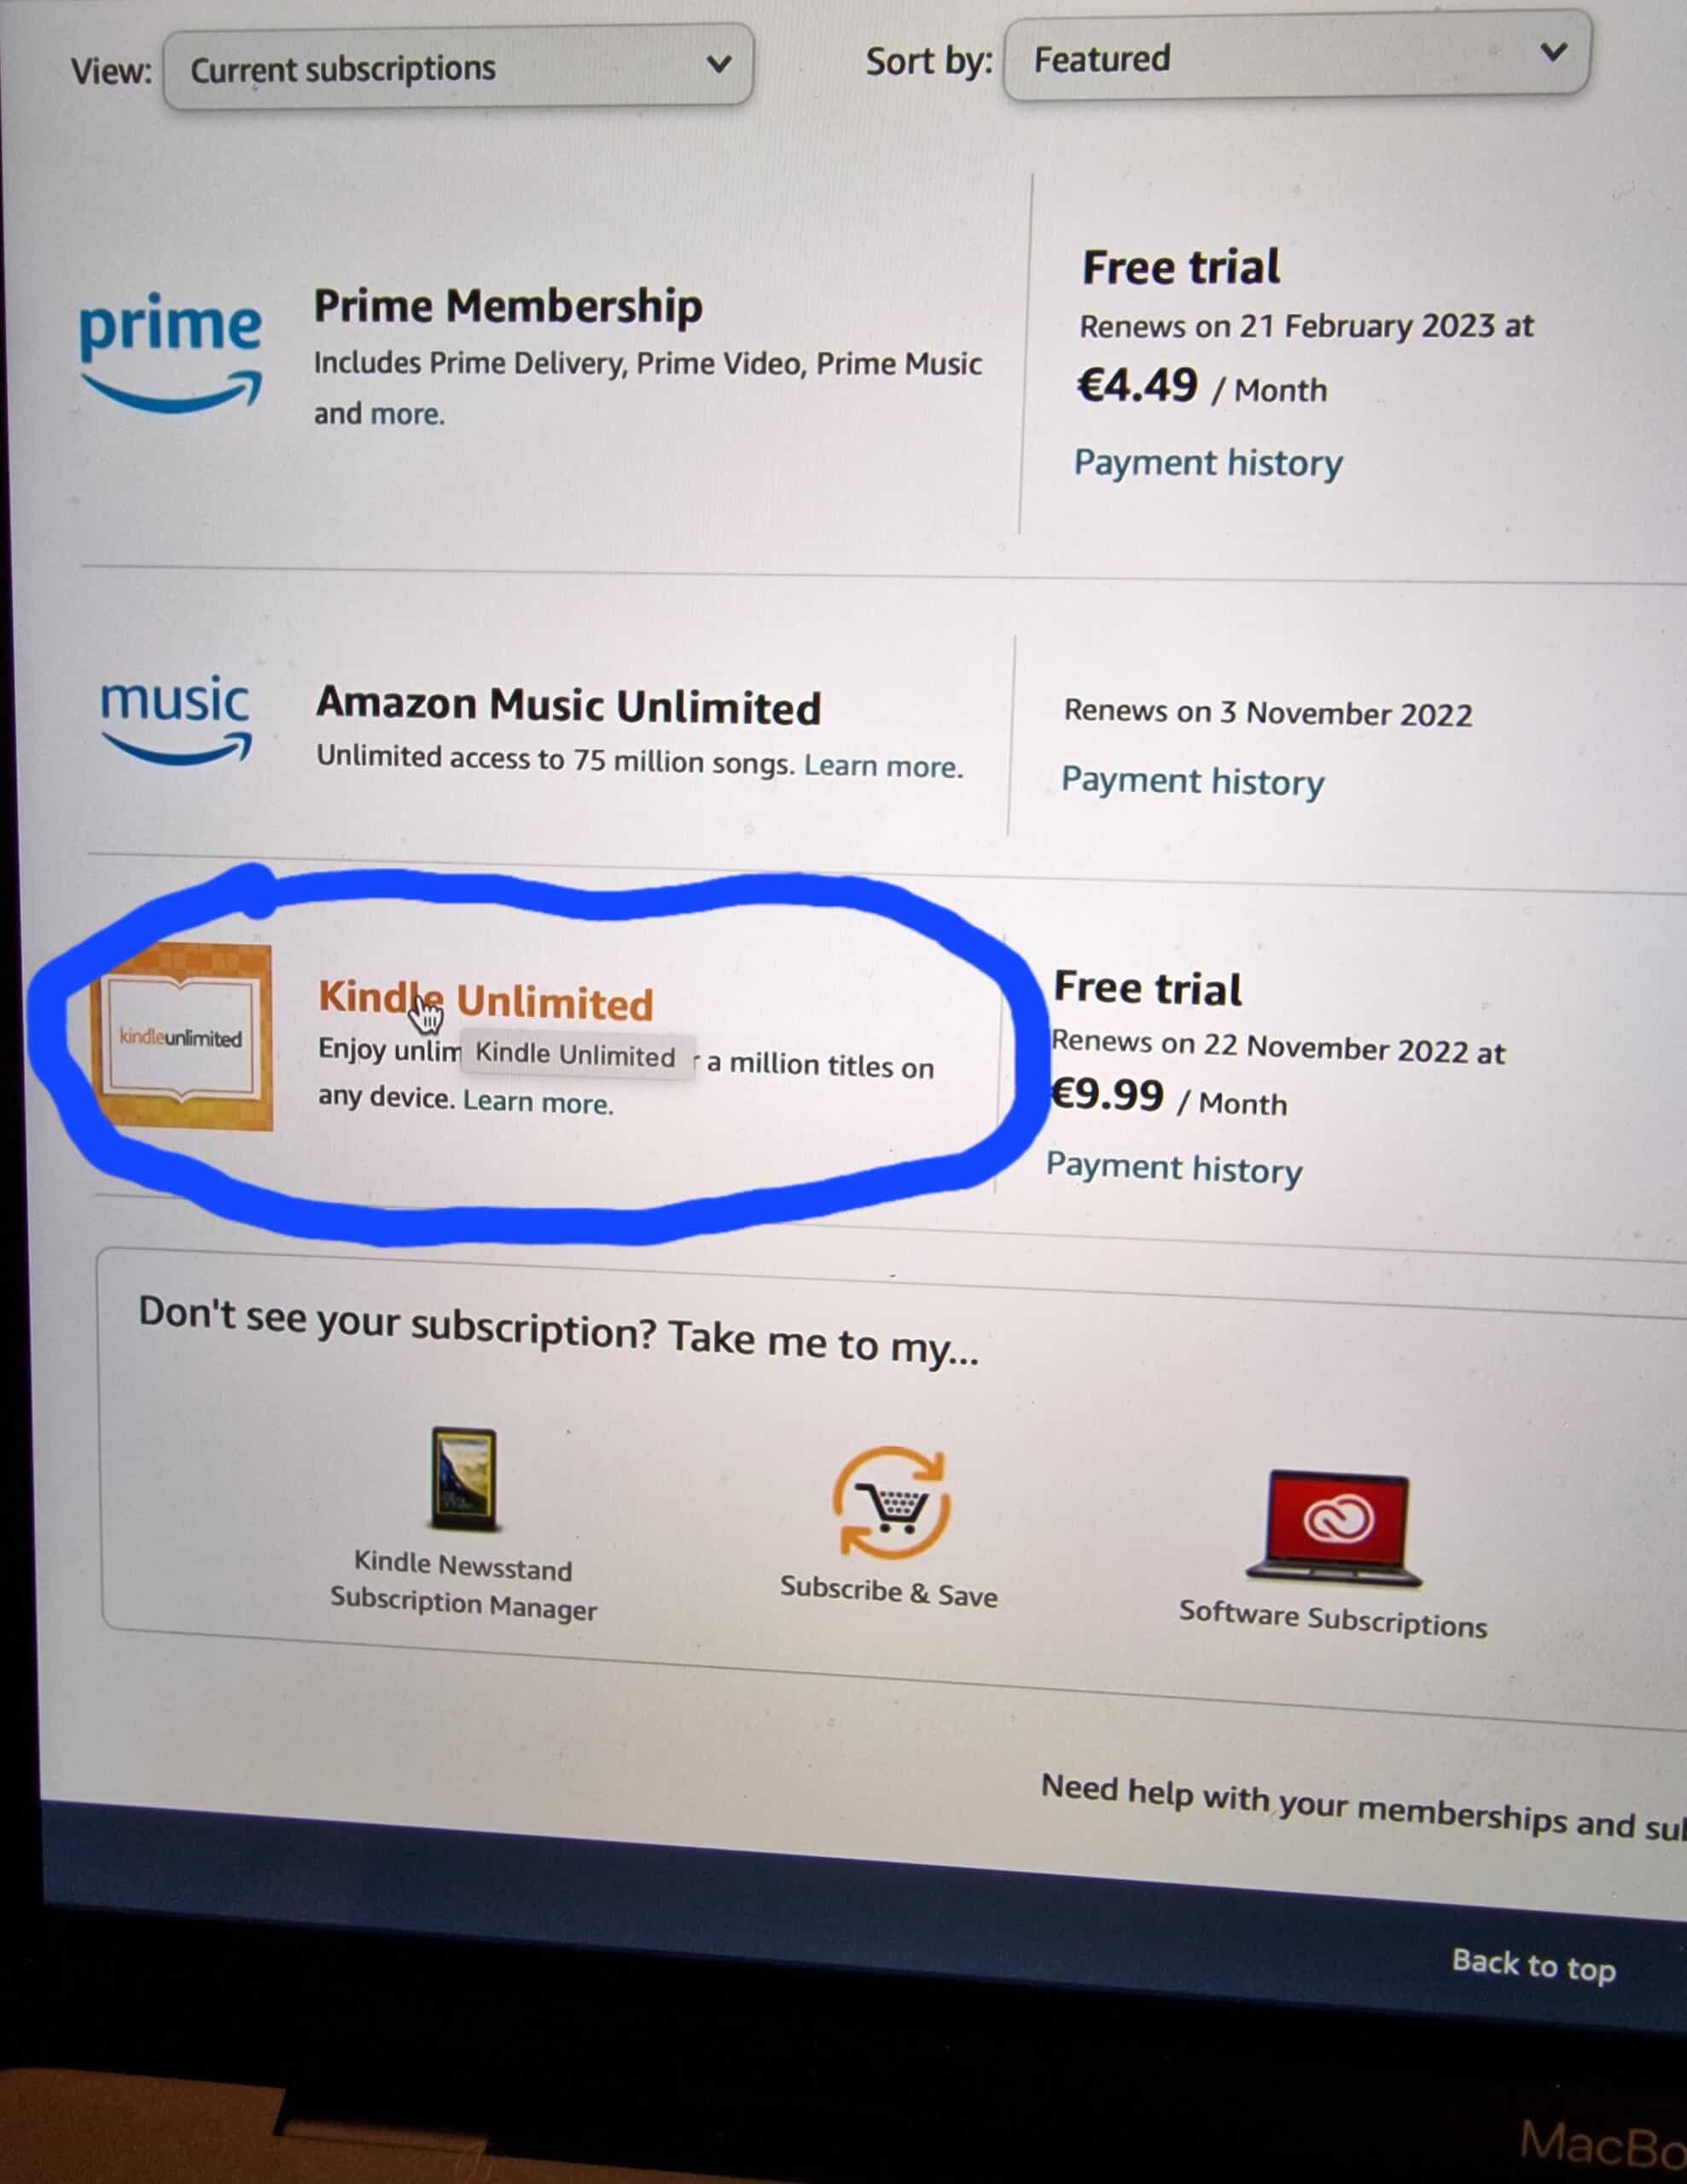 How to Cancel Kindle Unlimited